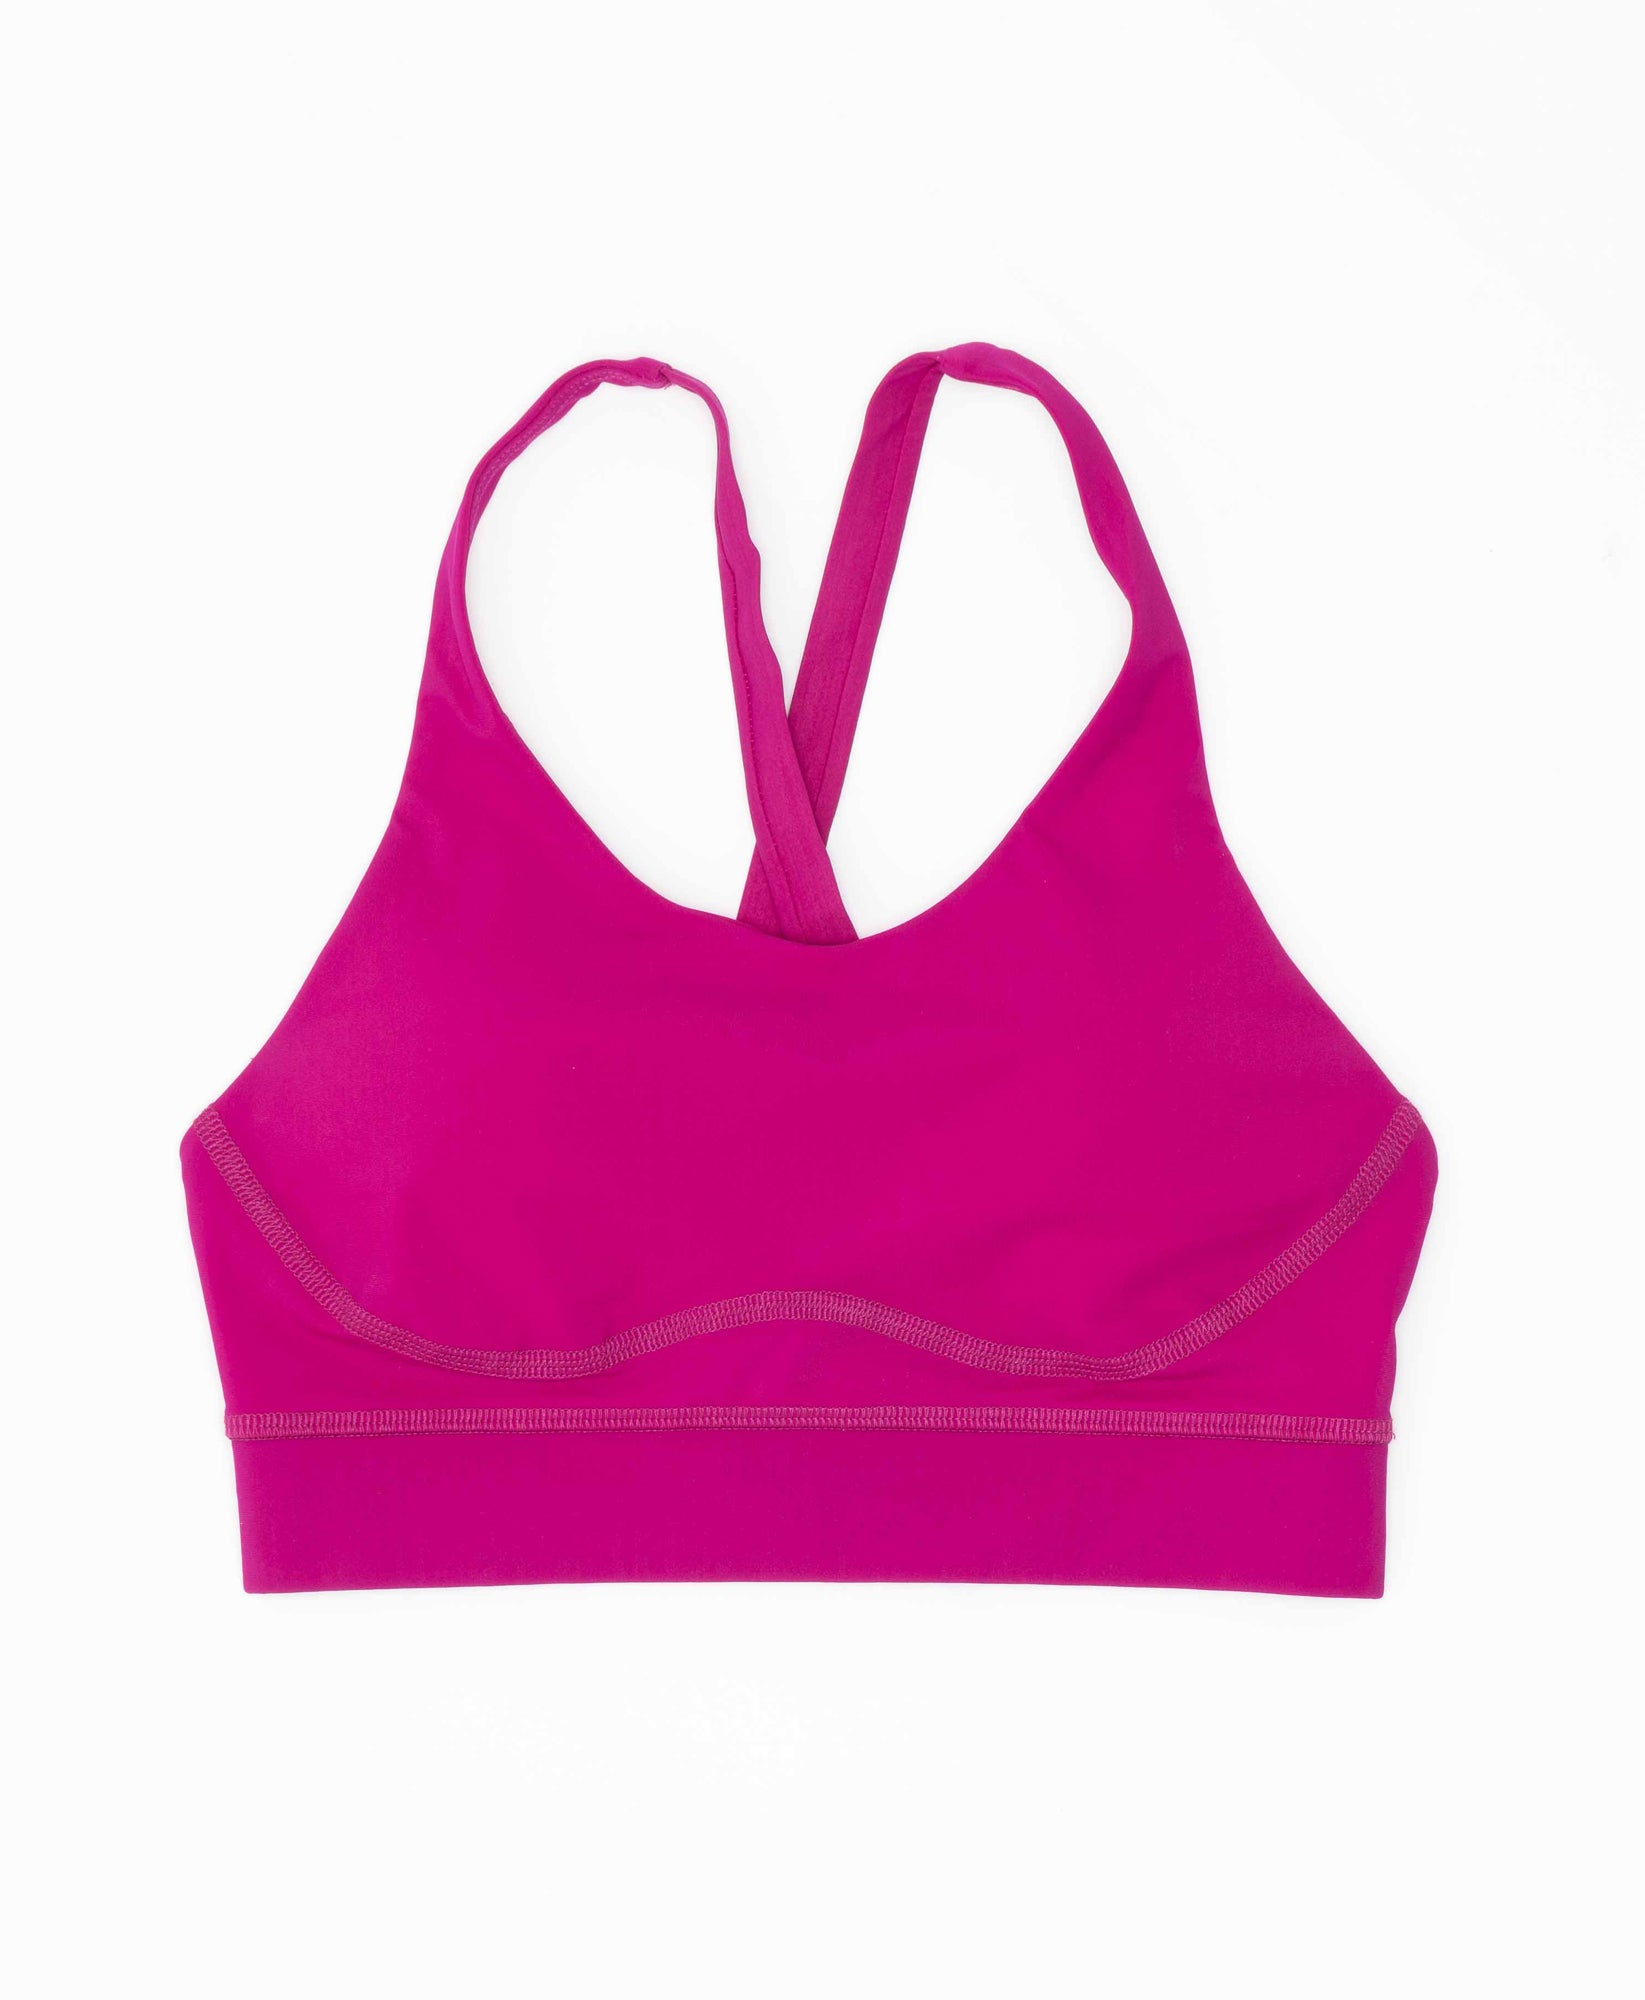 Wear One's At Cross Back Crop Bra in Magenta on Model Front View